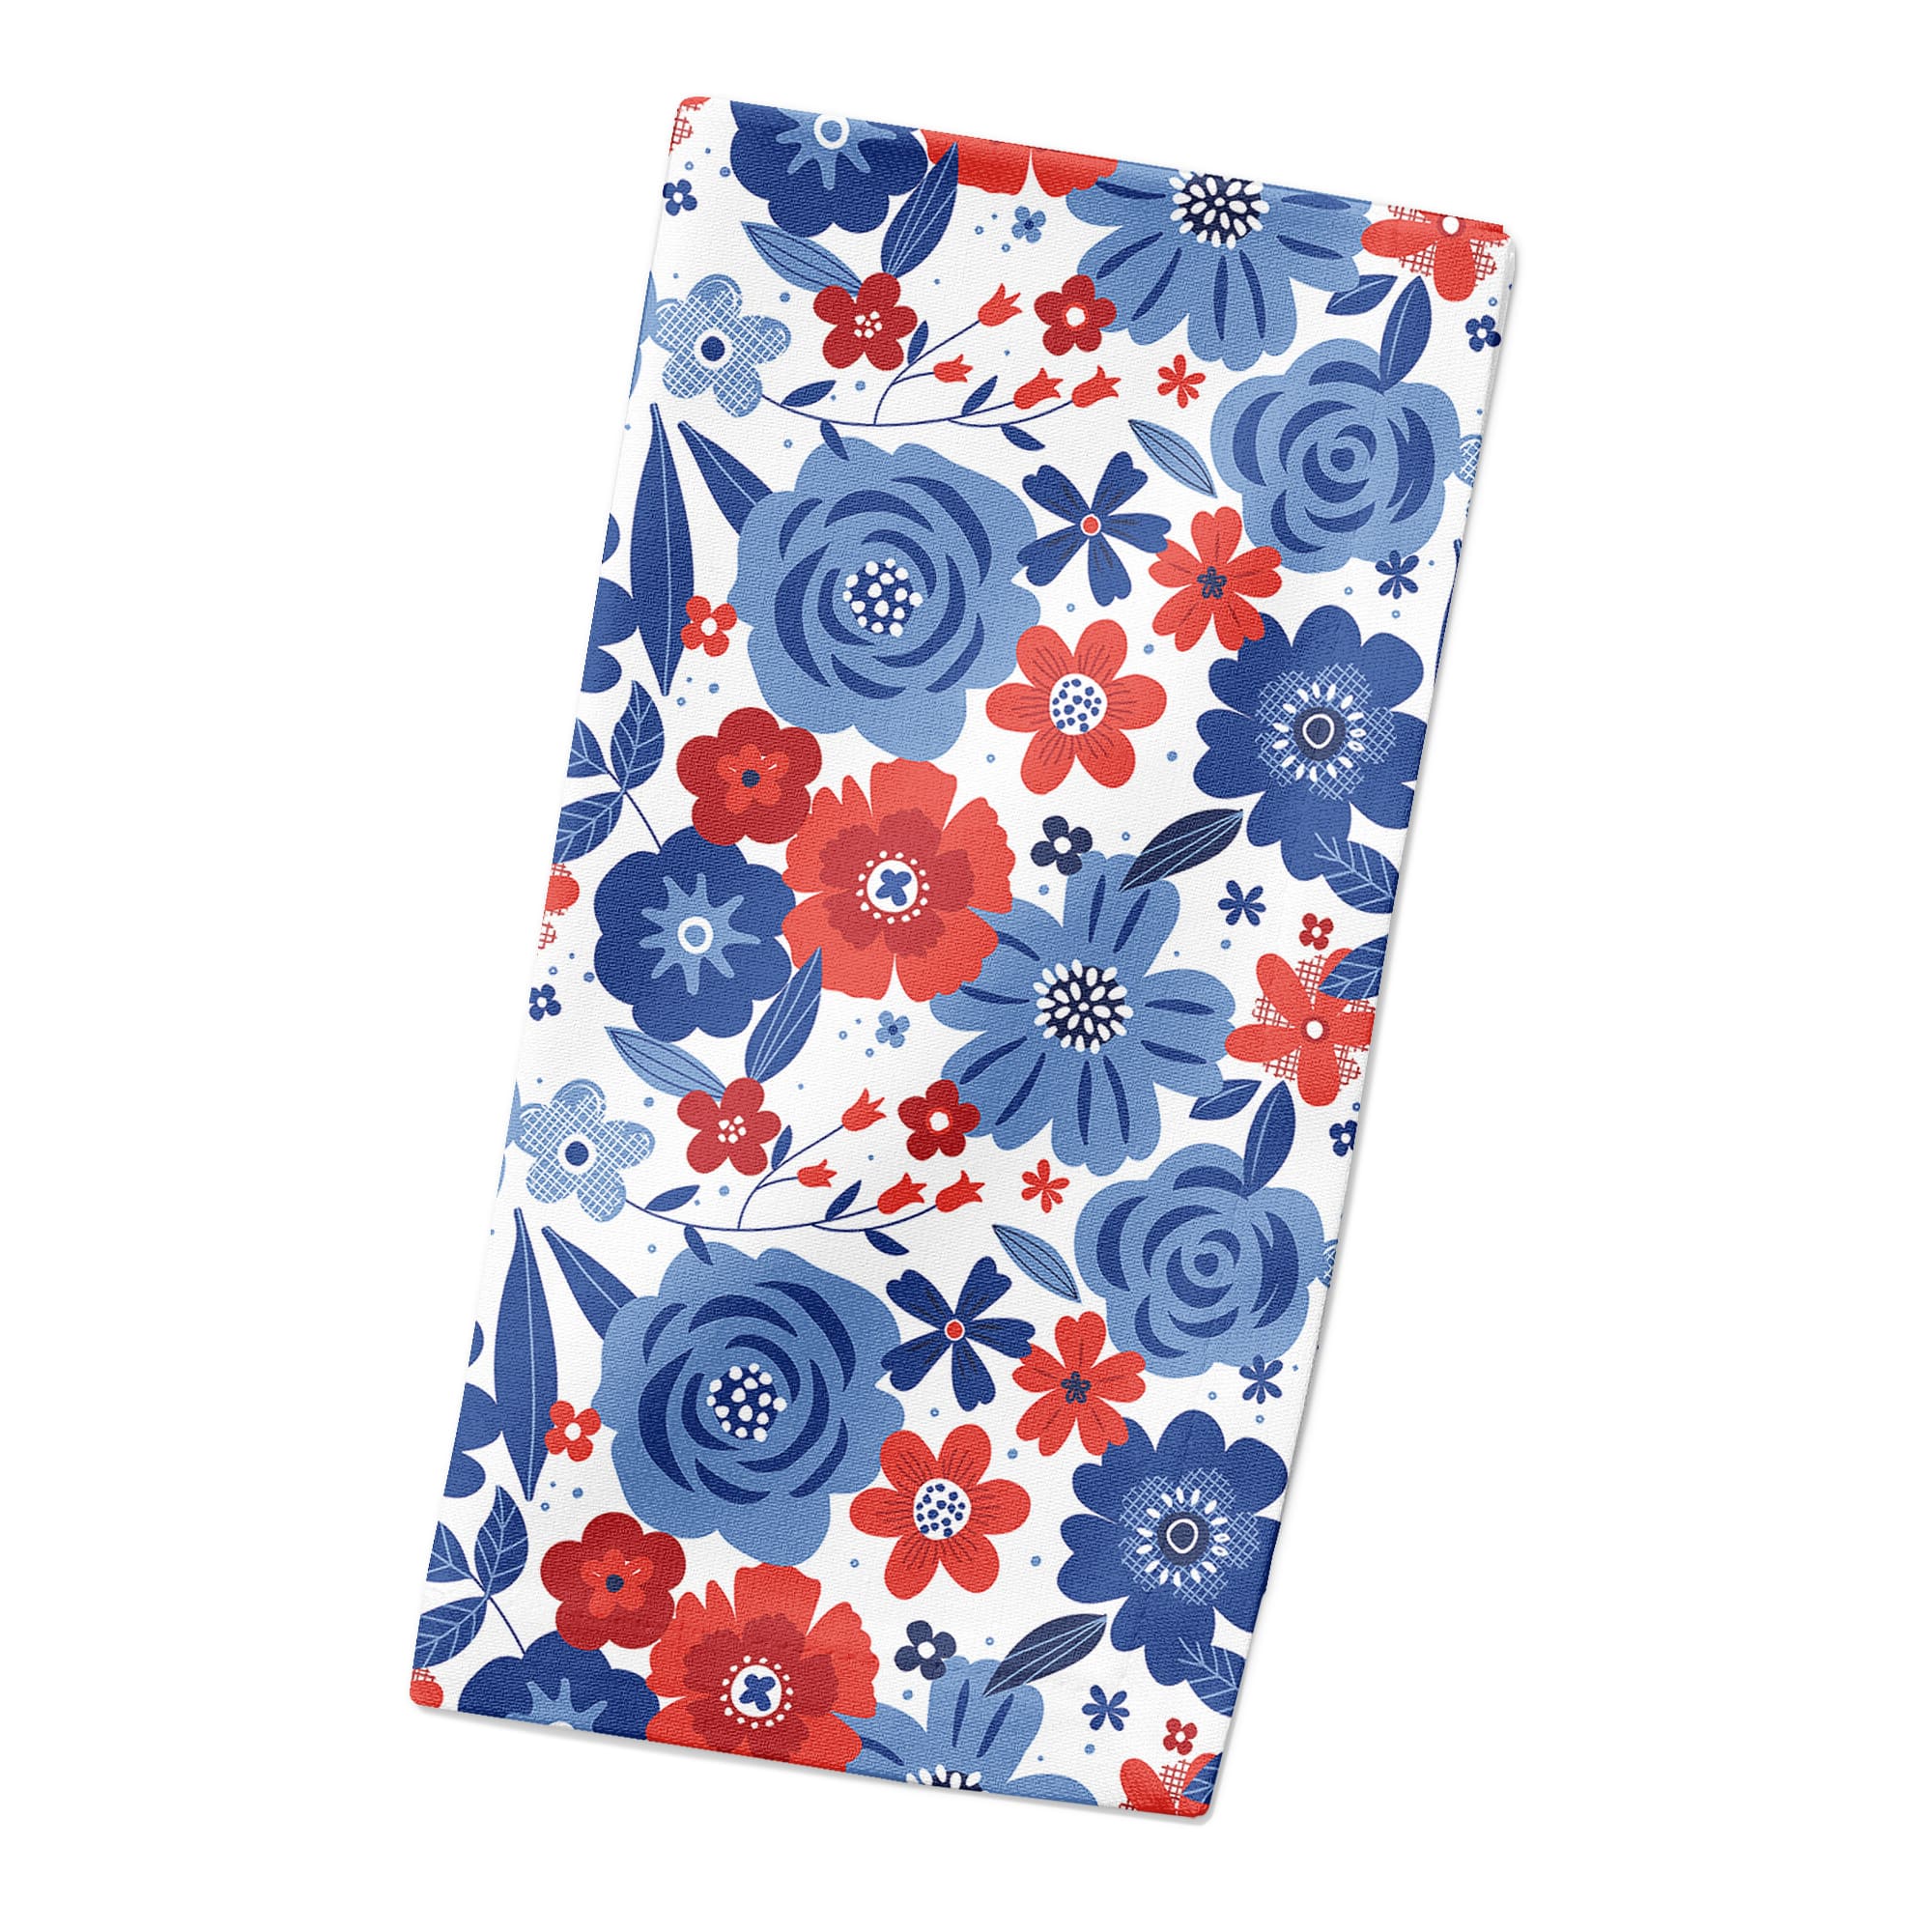 Red White and Blue Florals Cotton Twill Napkin